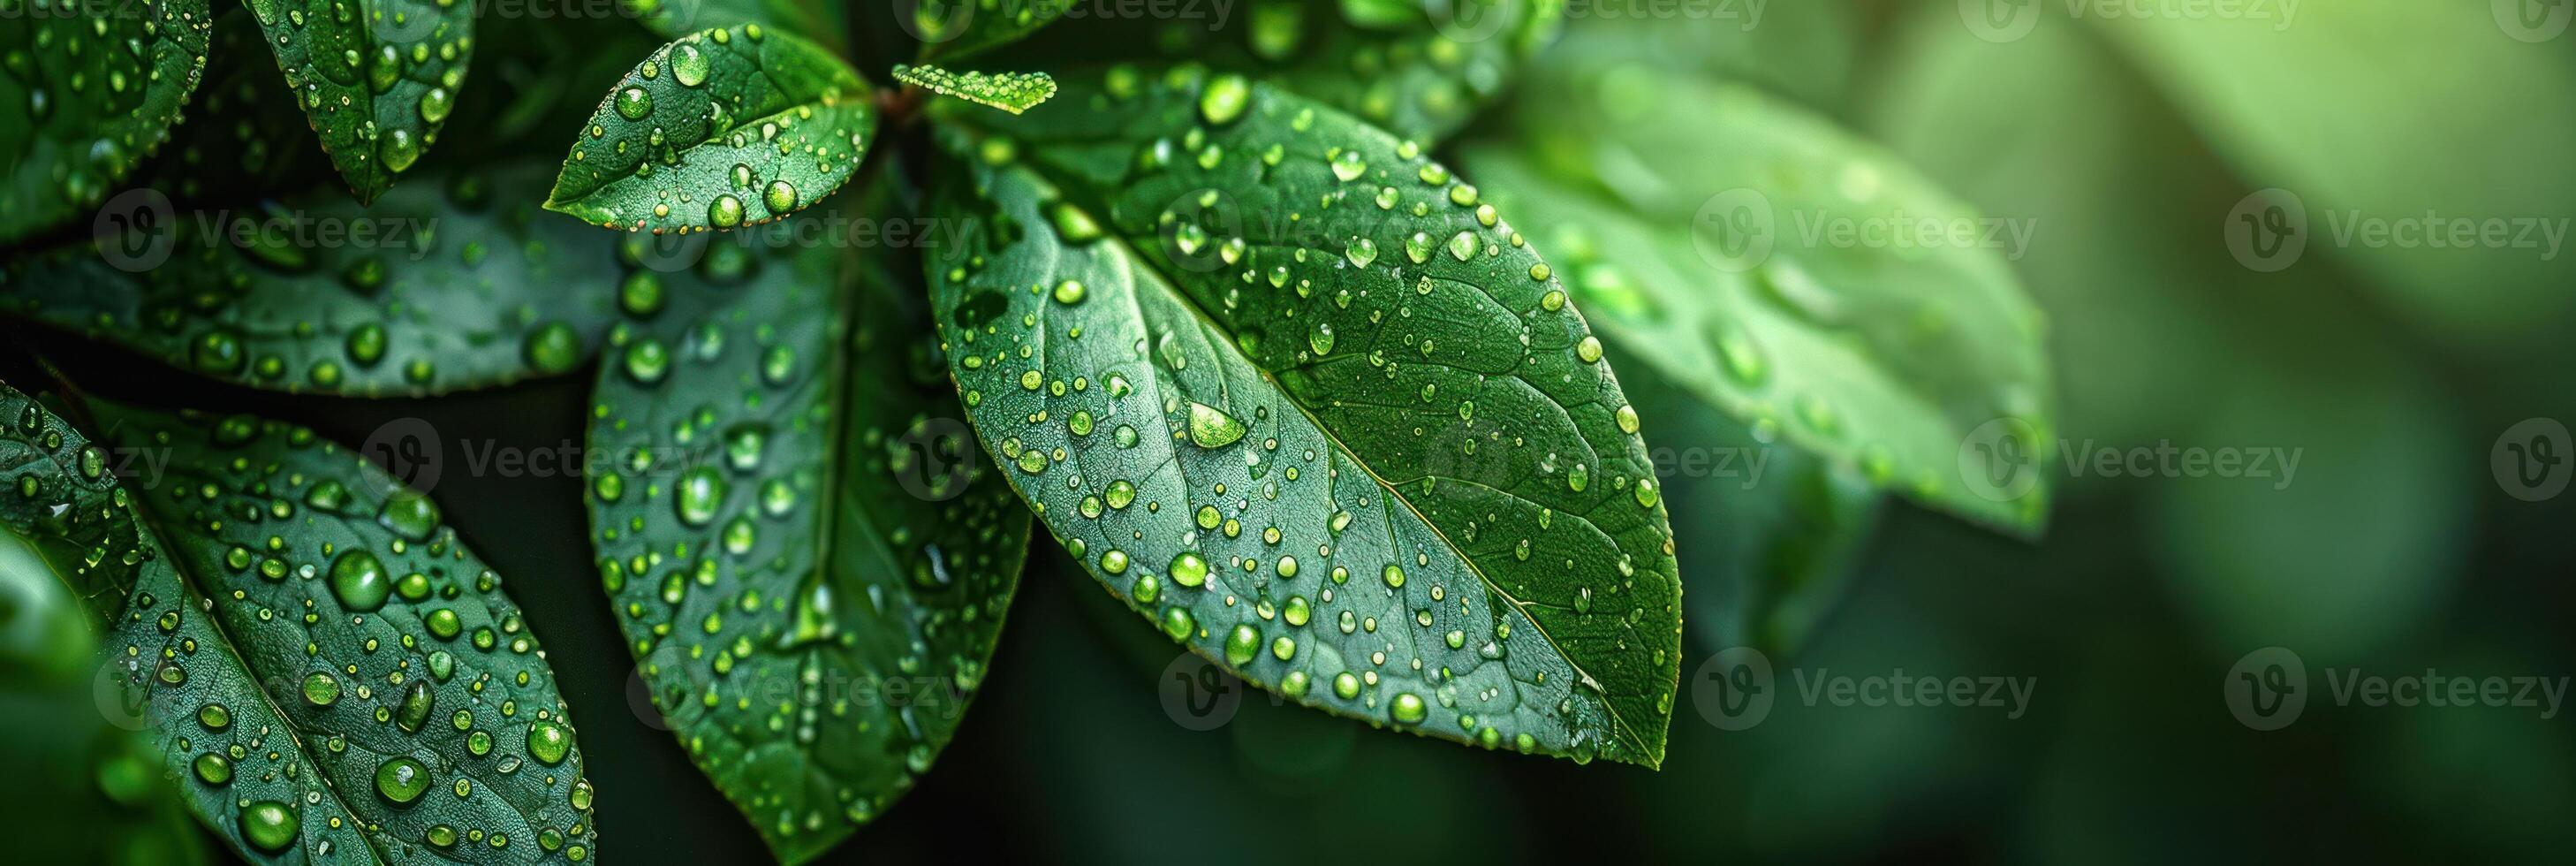 Water drops on green leaves after rainfall photo